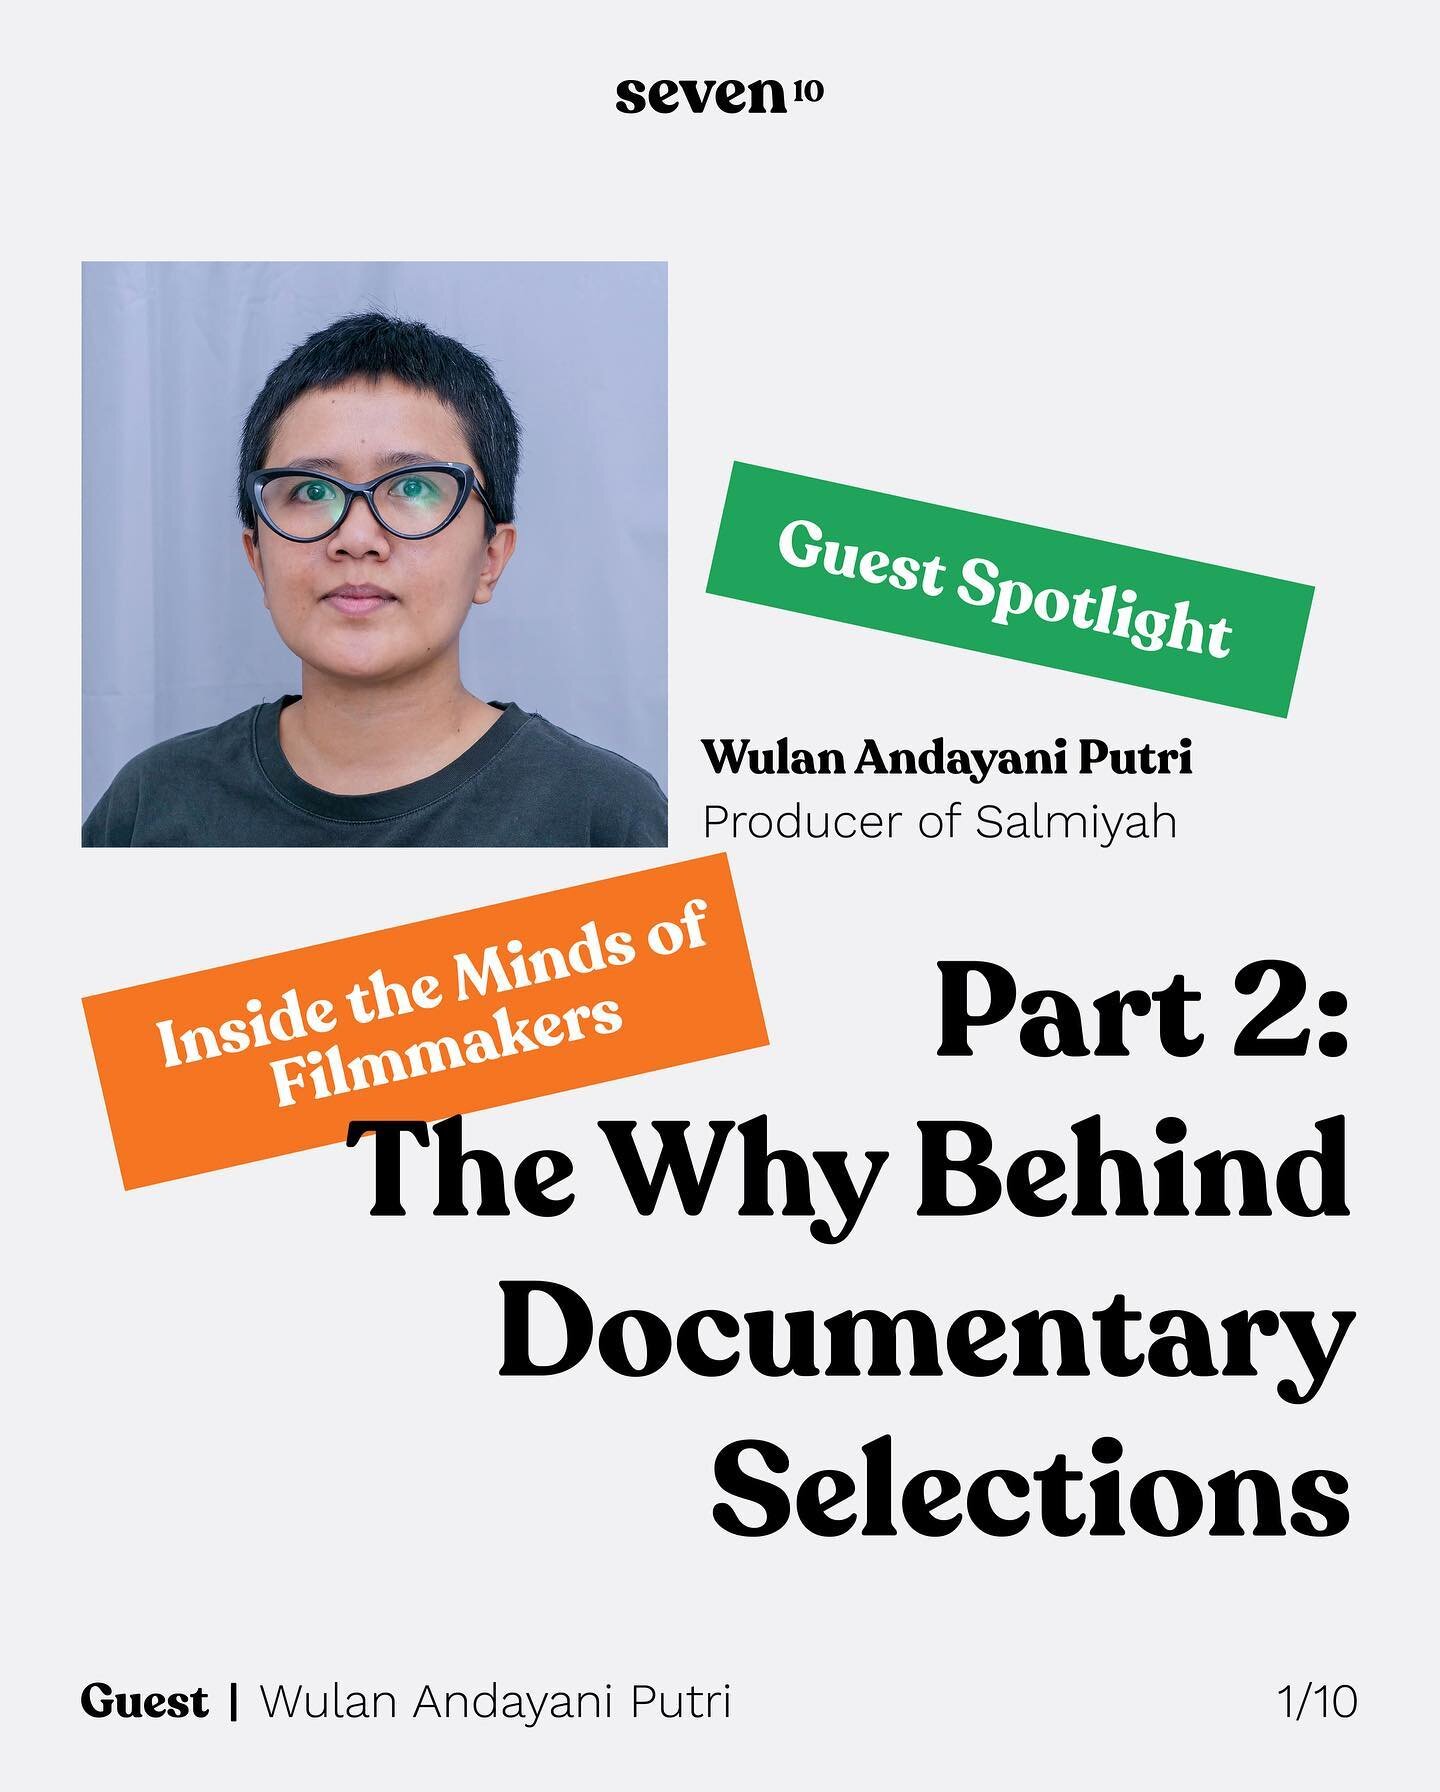 Meet Putri, also known as Wulan, a director and producer. As a historian, she sees documentaries as a form of historiography, offering a unique perspective on the past and future. Each encounter with her subject in documentary filmmaking leaves an in